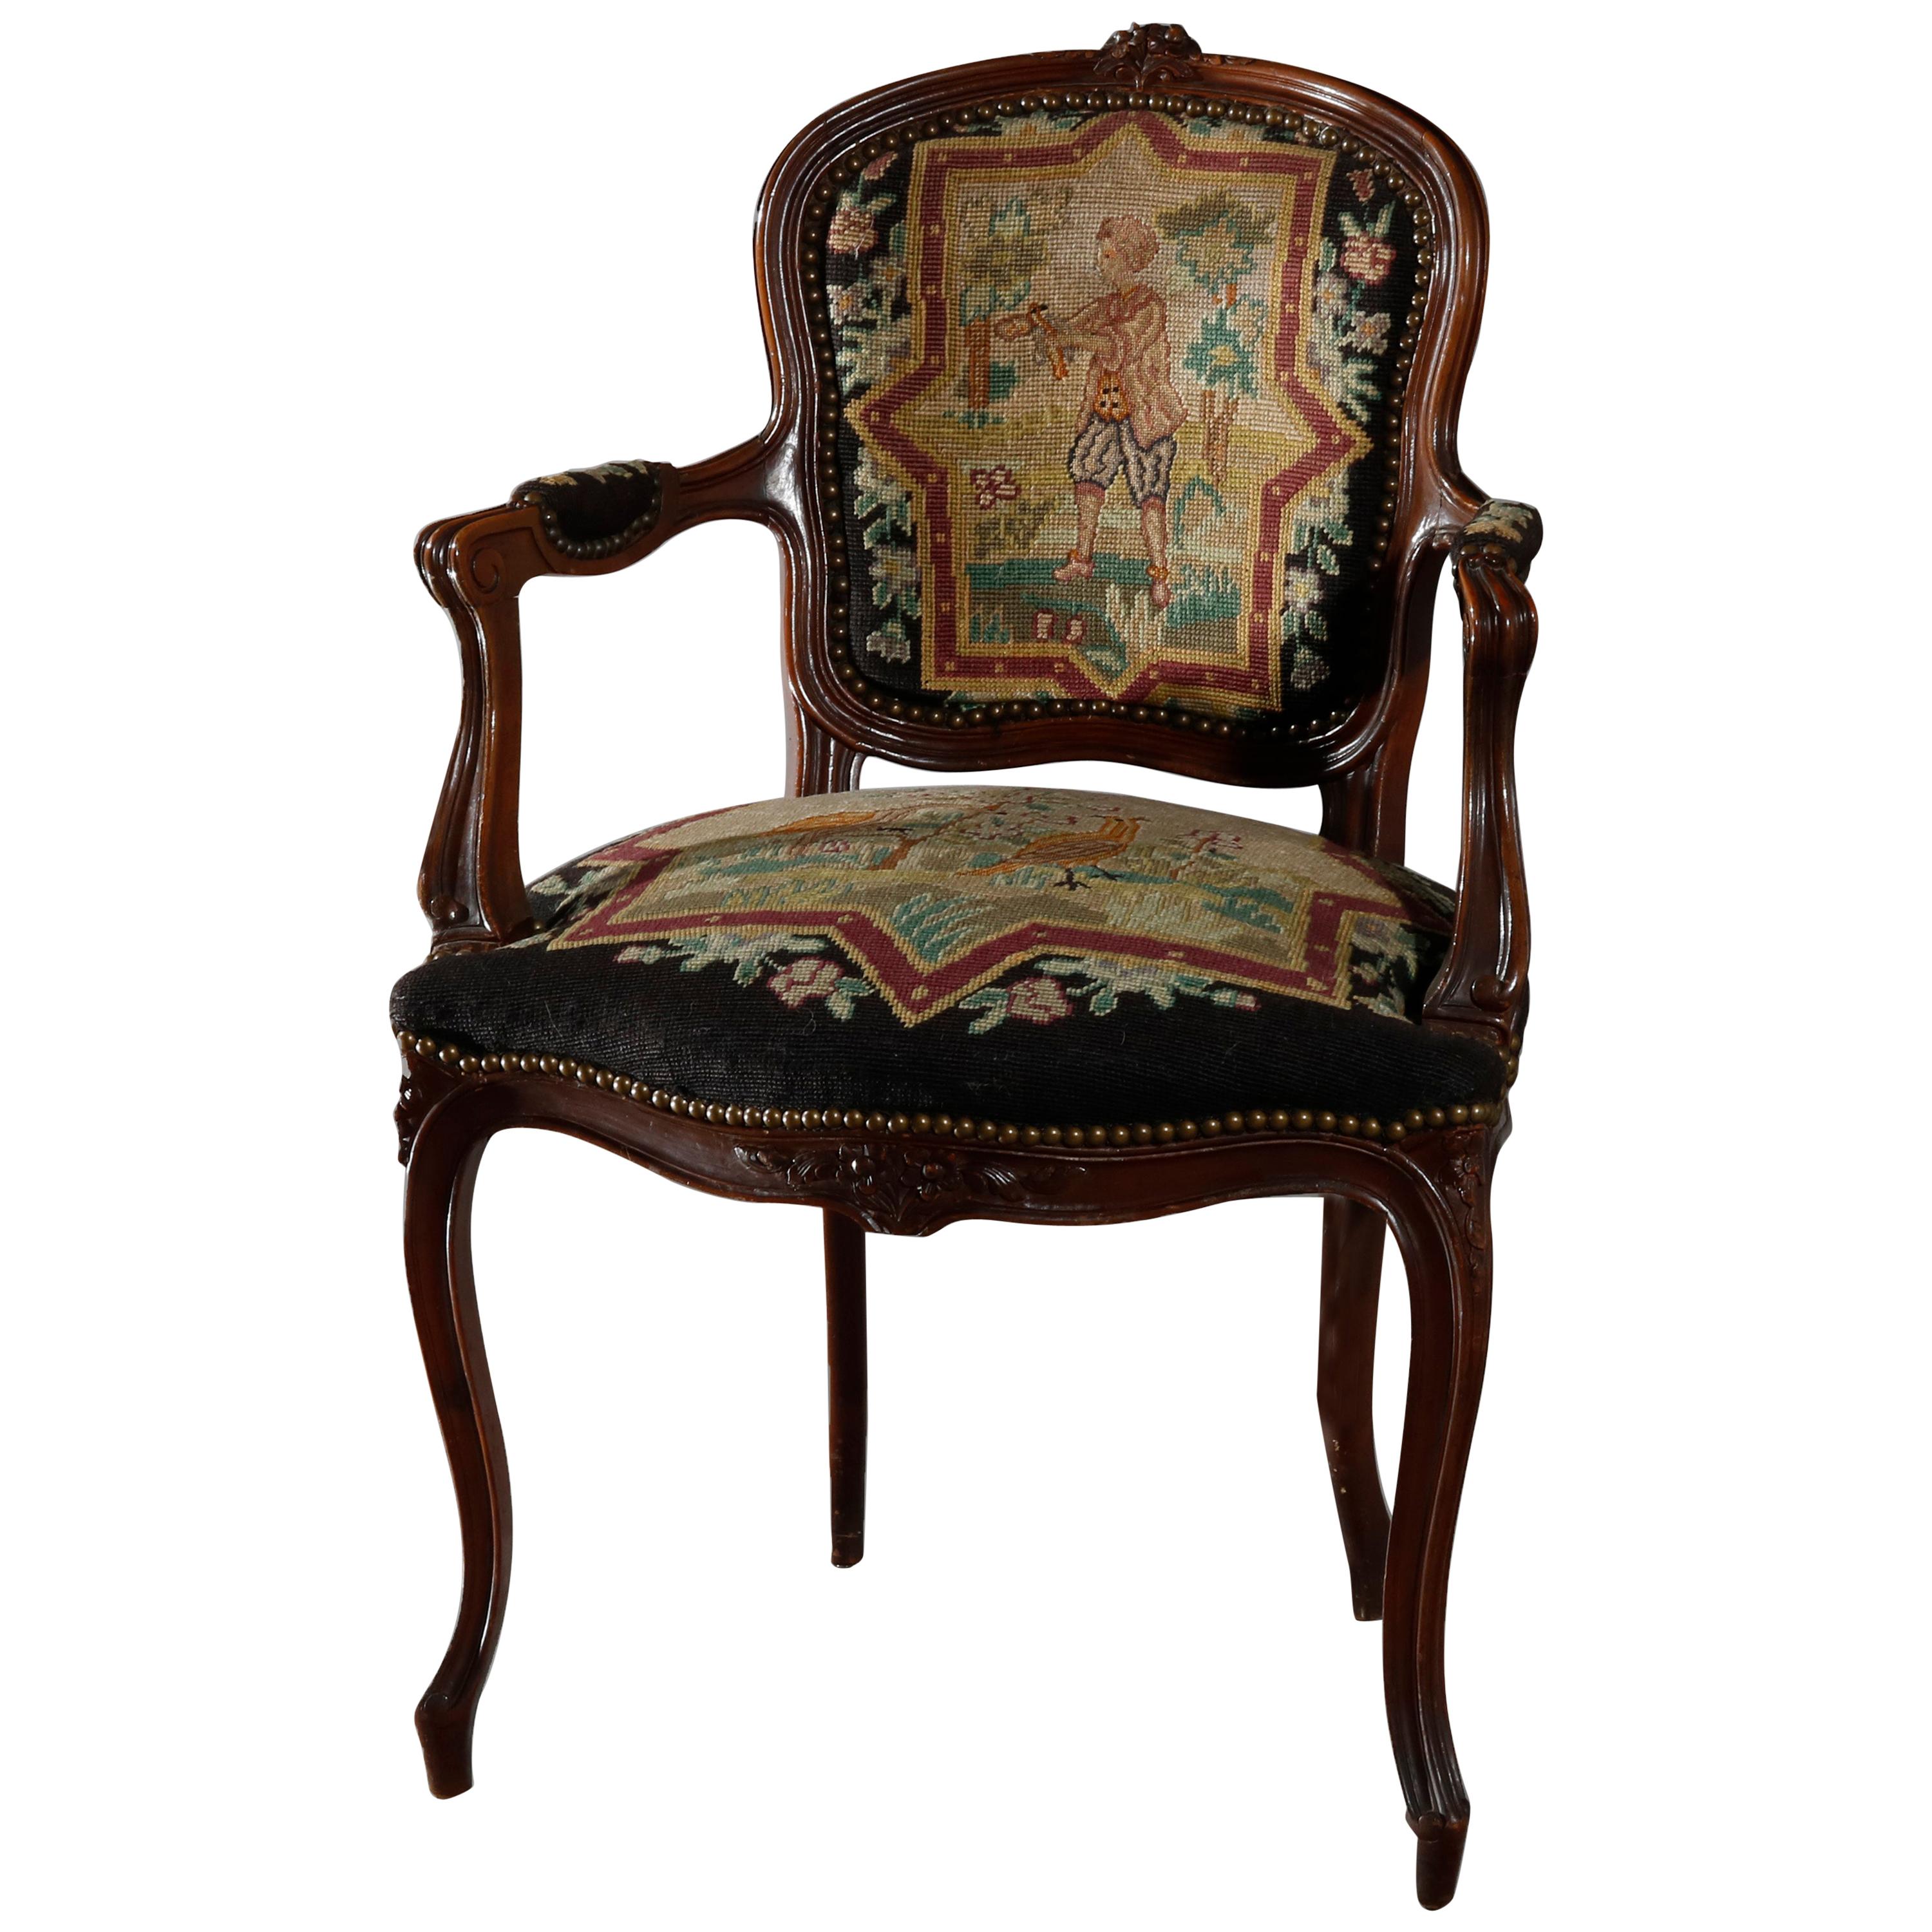 Antique French Louis XIV Needlepoint Fauteuil Armchair, circa 1920